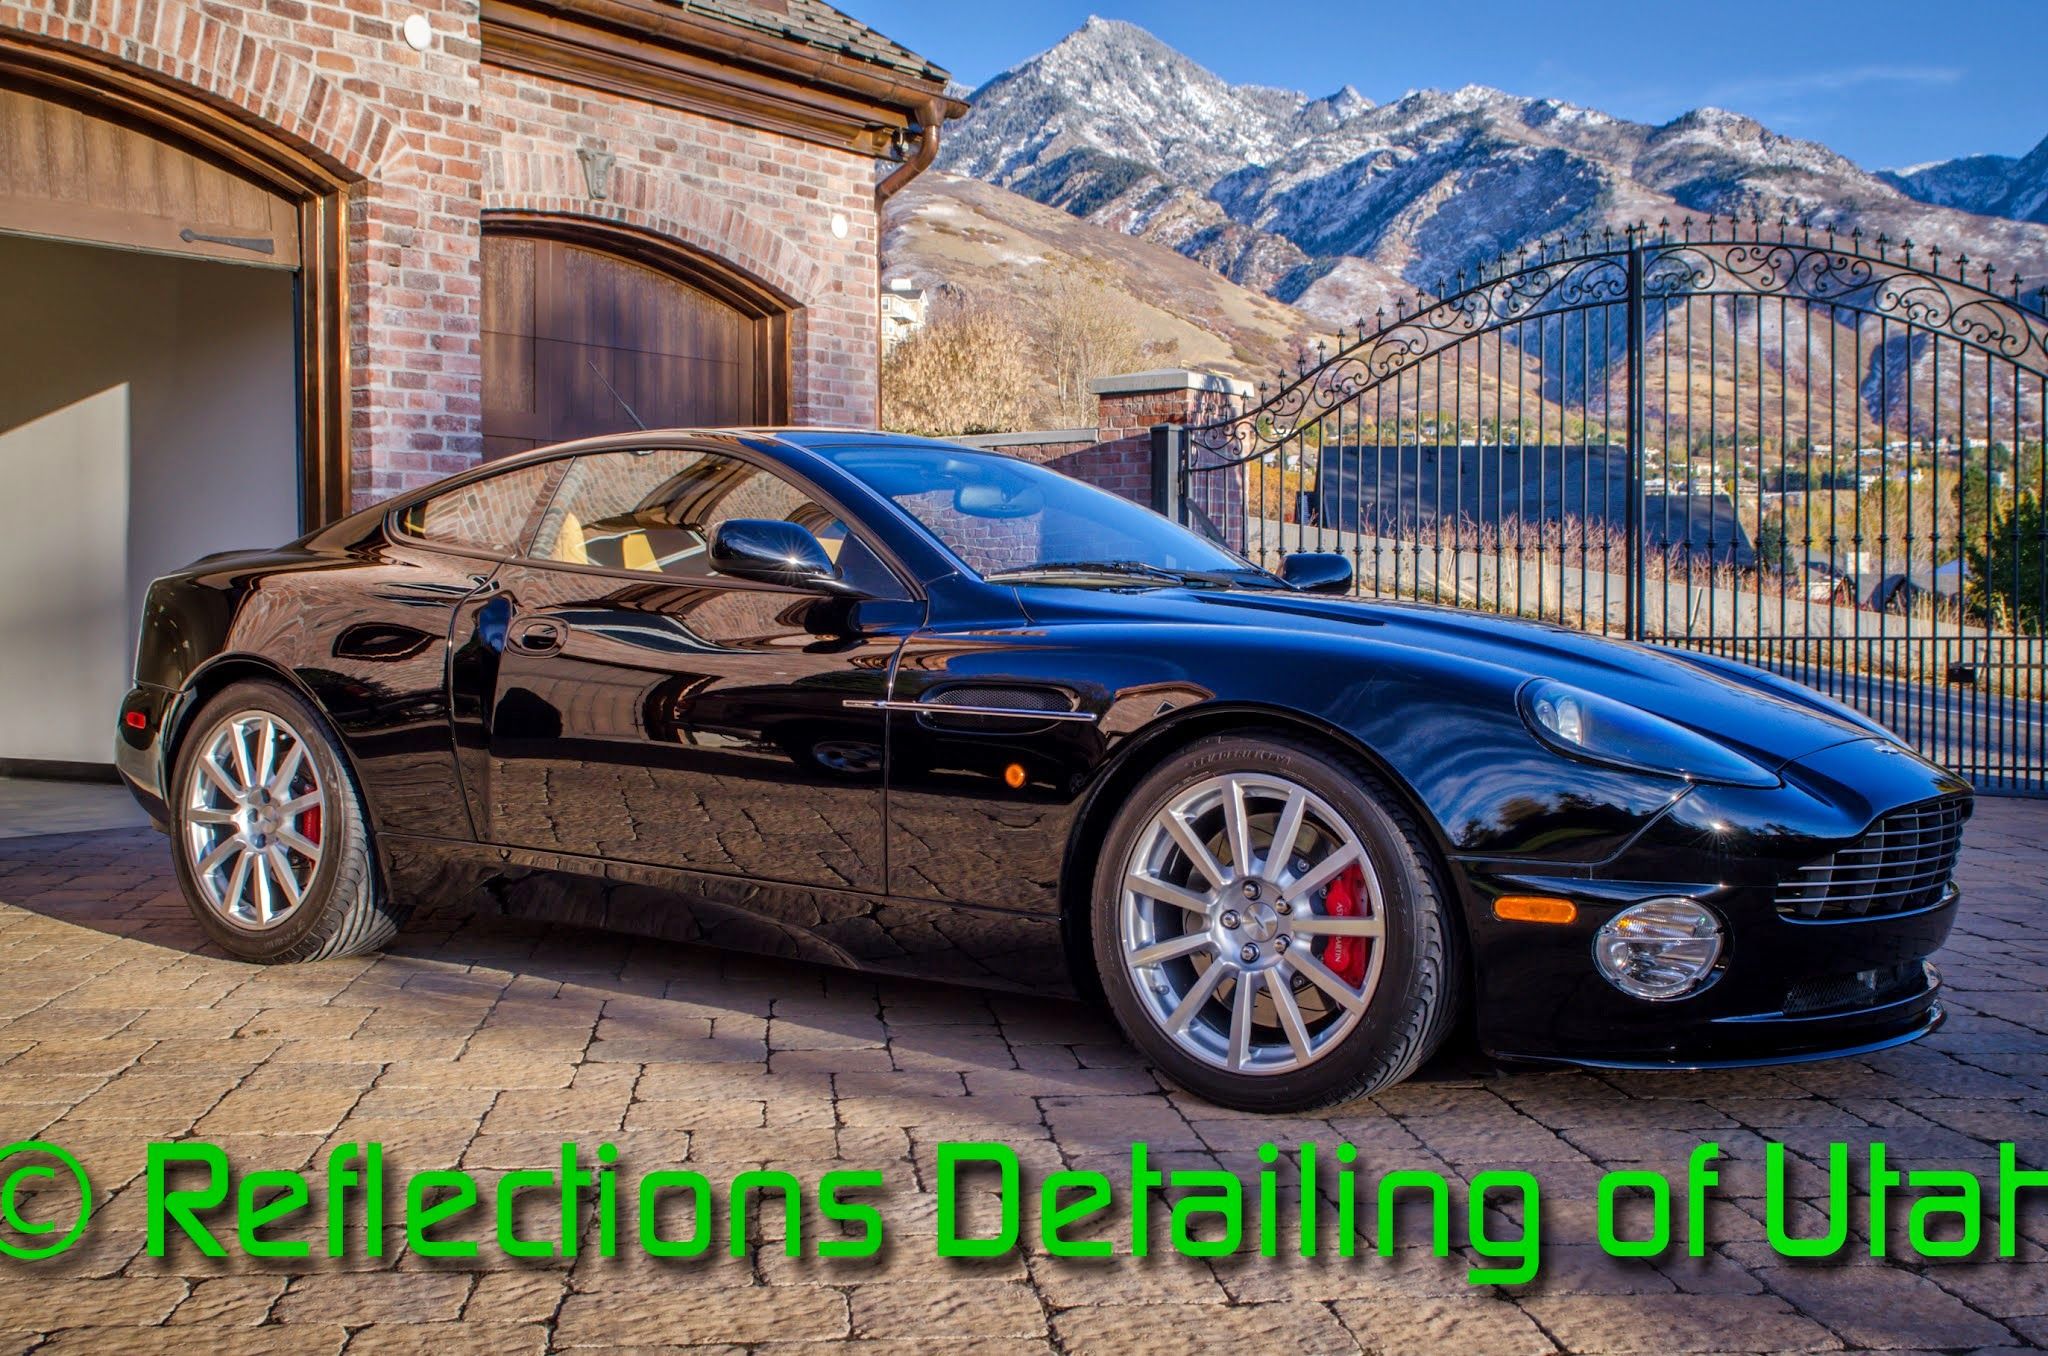 Services & Products Reflections Auto Detailing of Utah LLC in Logan UT